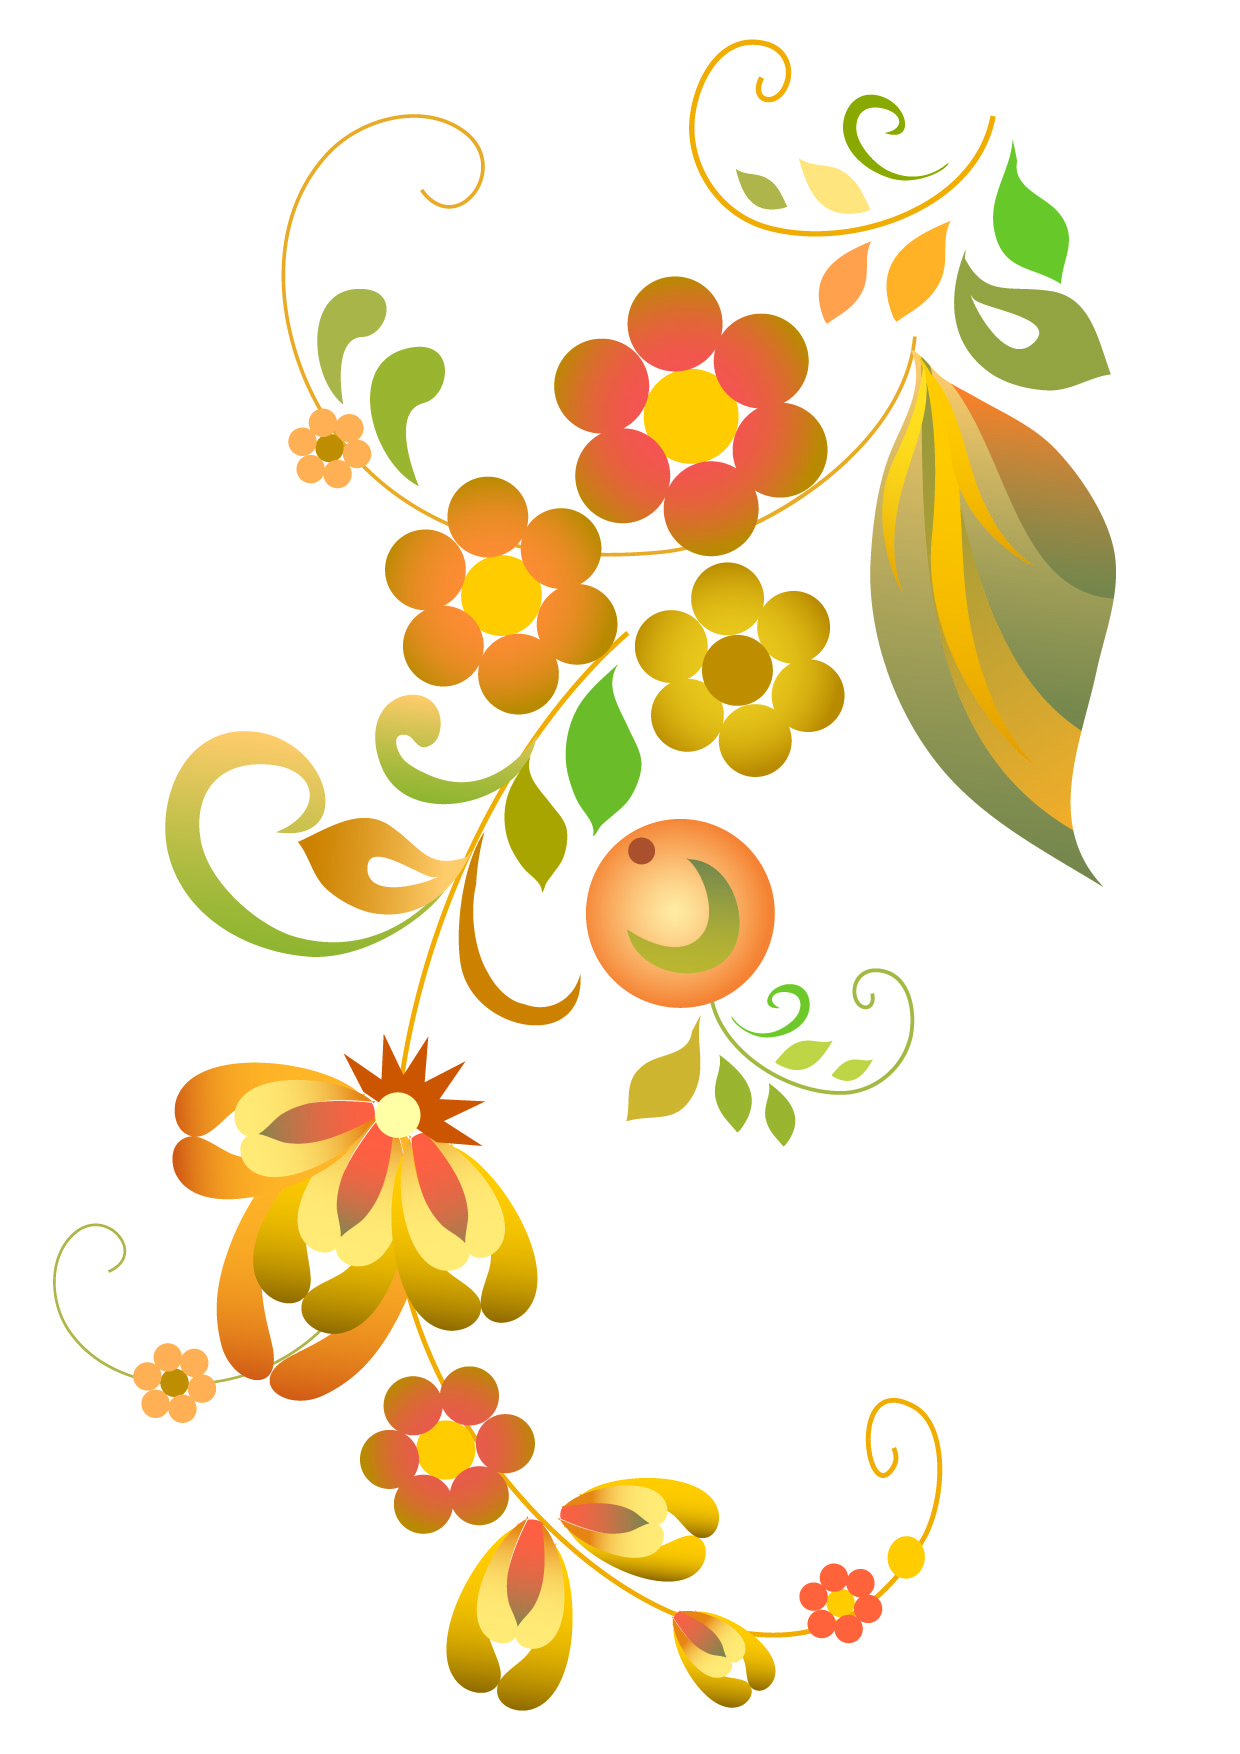 Flowers Vector - Cliparts.co